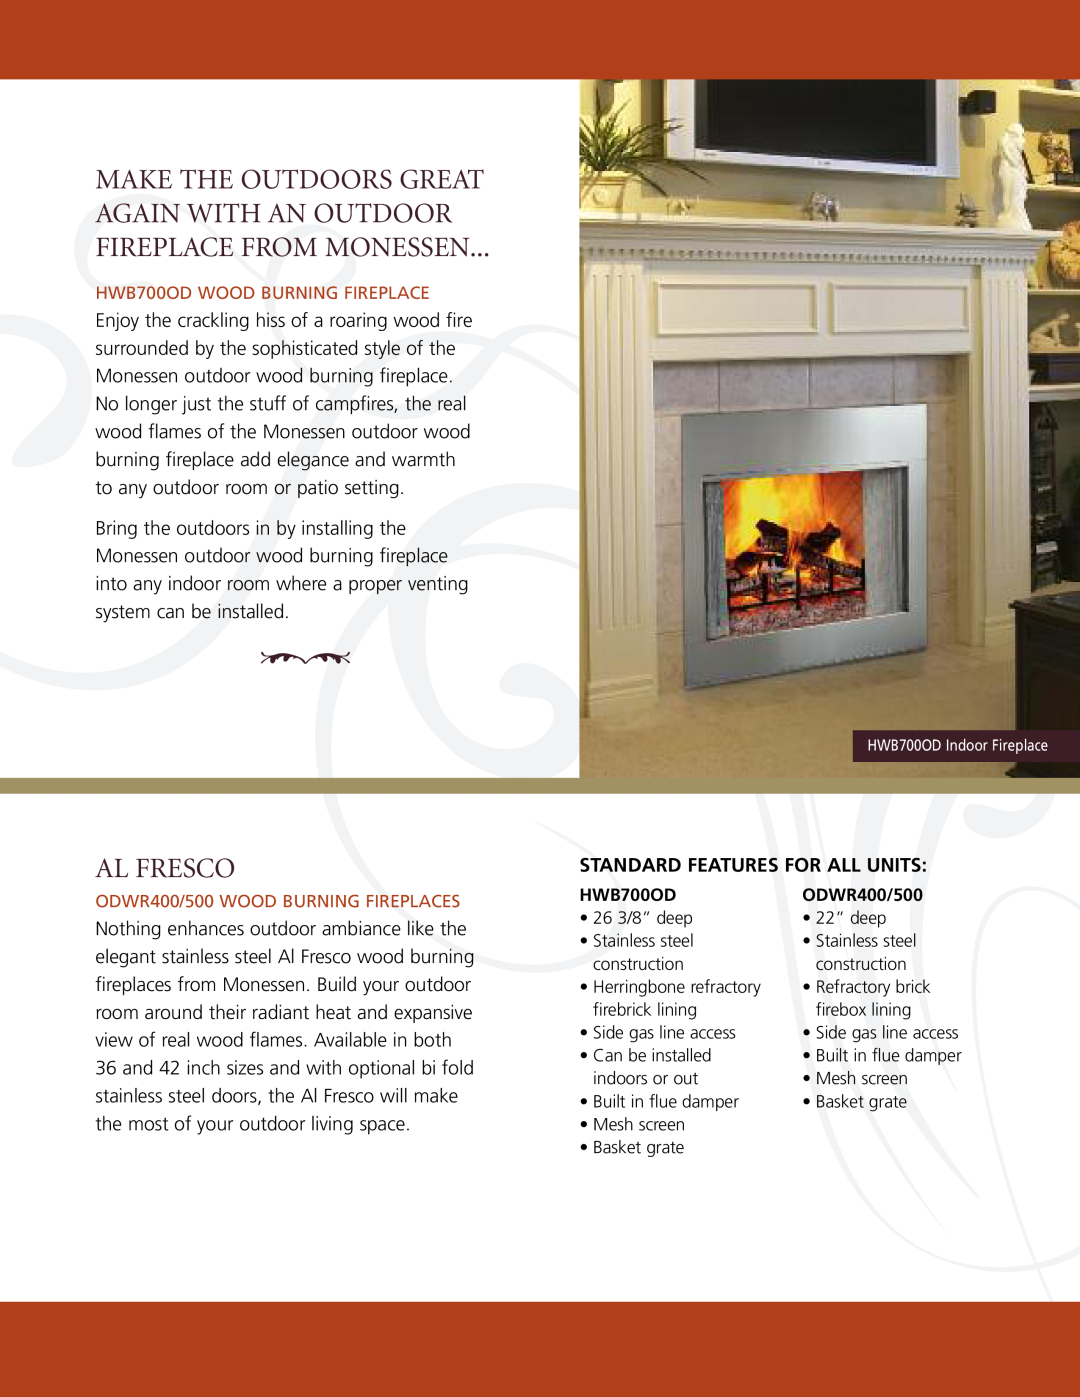 Monessen Hearth ODWR500, ODWR400 manual Al Fresco, Make The Outdoors Great Again With An Outdoor Fireplace From Monessen 